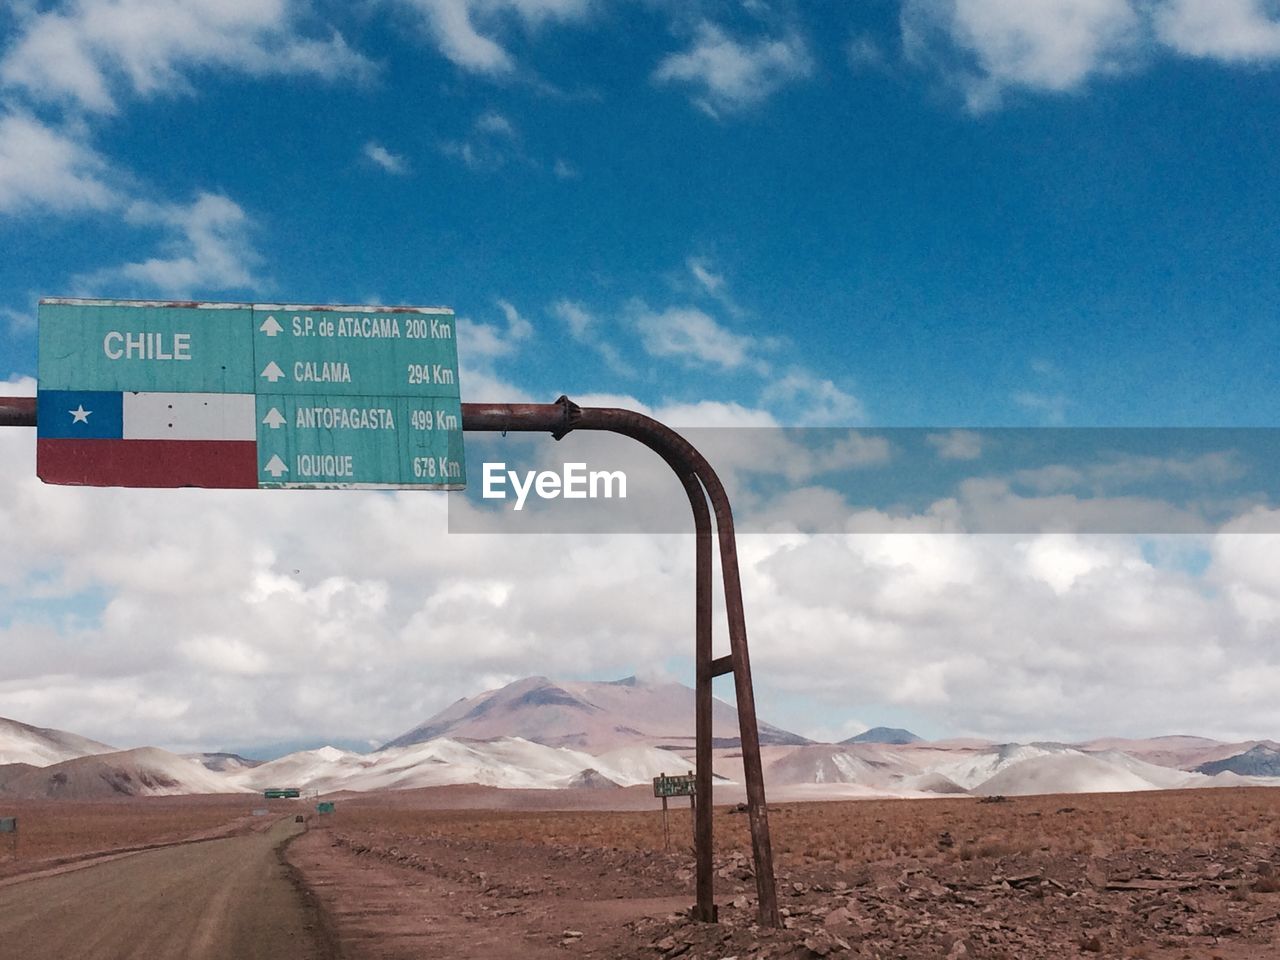 ROAD SIGN IN A DESERT